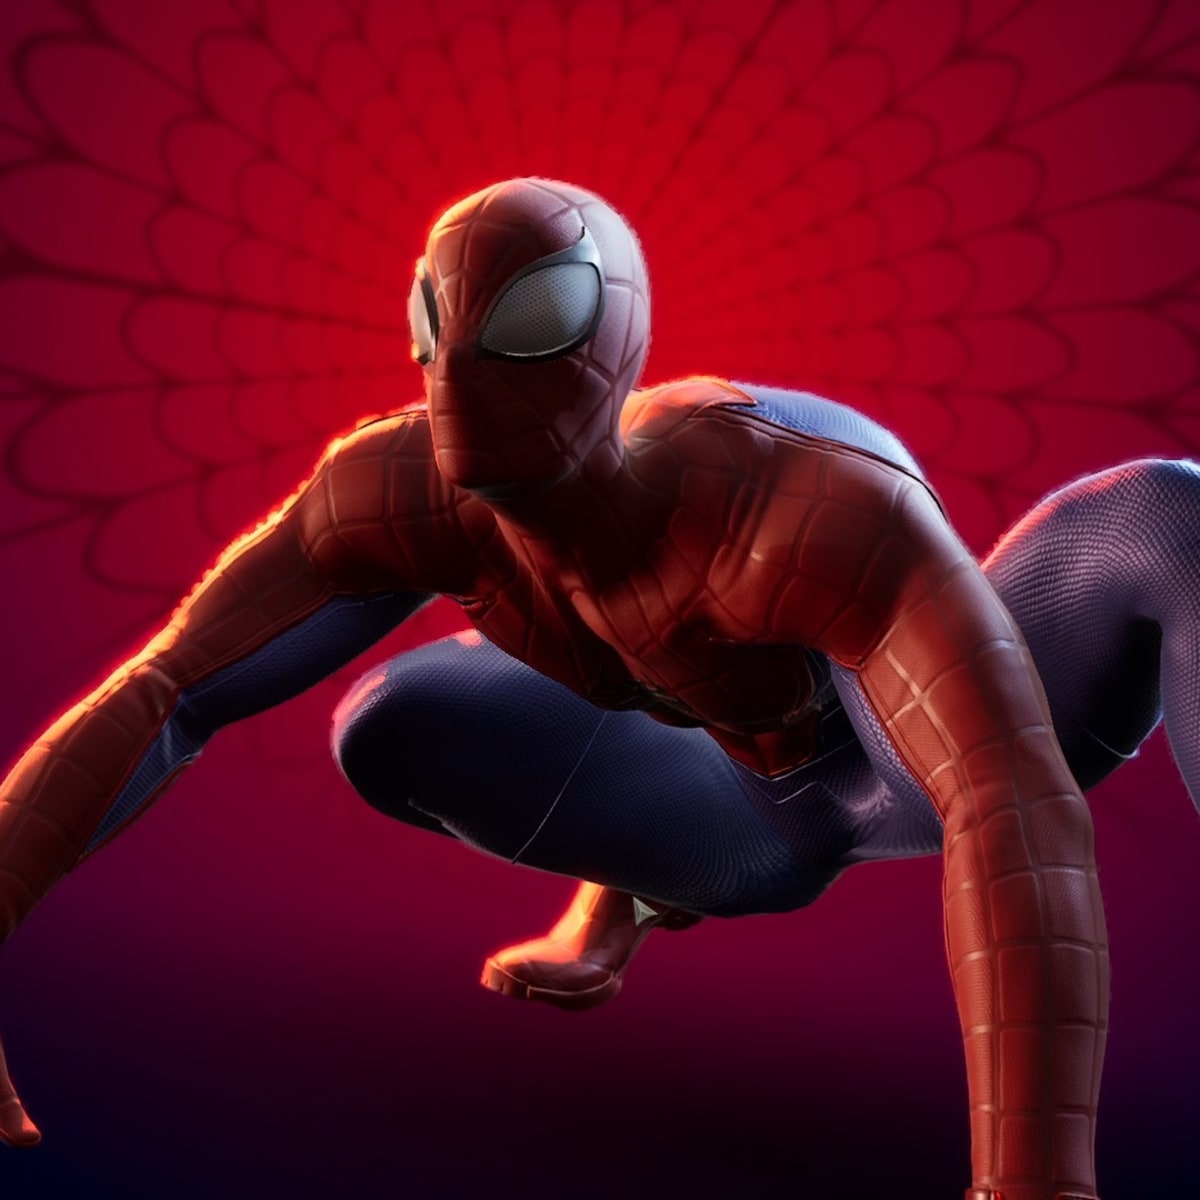 Spider-Man Gets an Upgrade in a New Marvel's Midnight Suns Preview